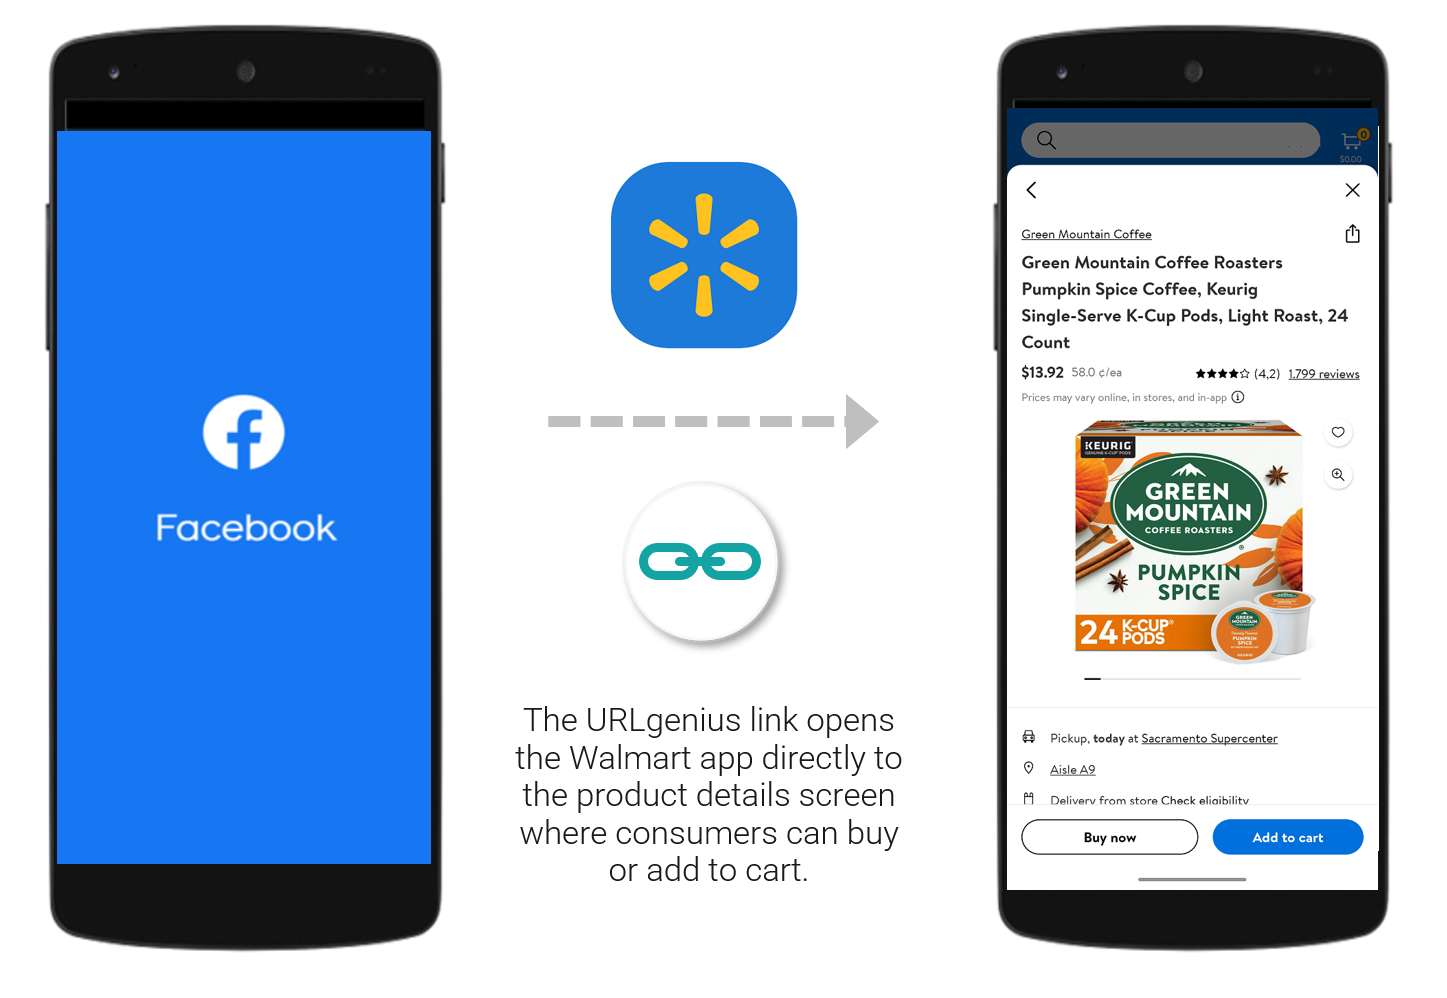 Facebook Advertising for Walmart Marketplace: How To Deep Link to Open the Walmart App from Facebook